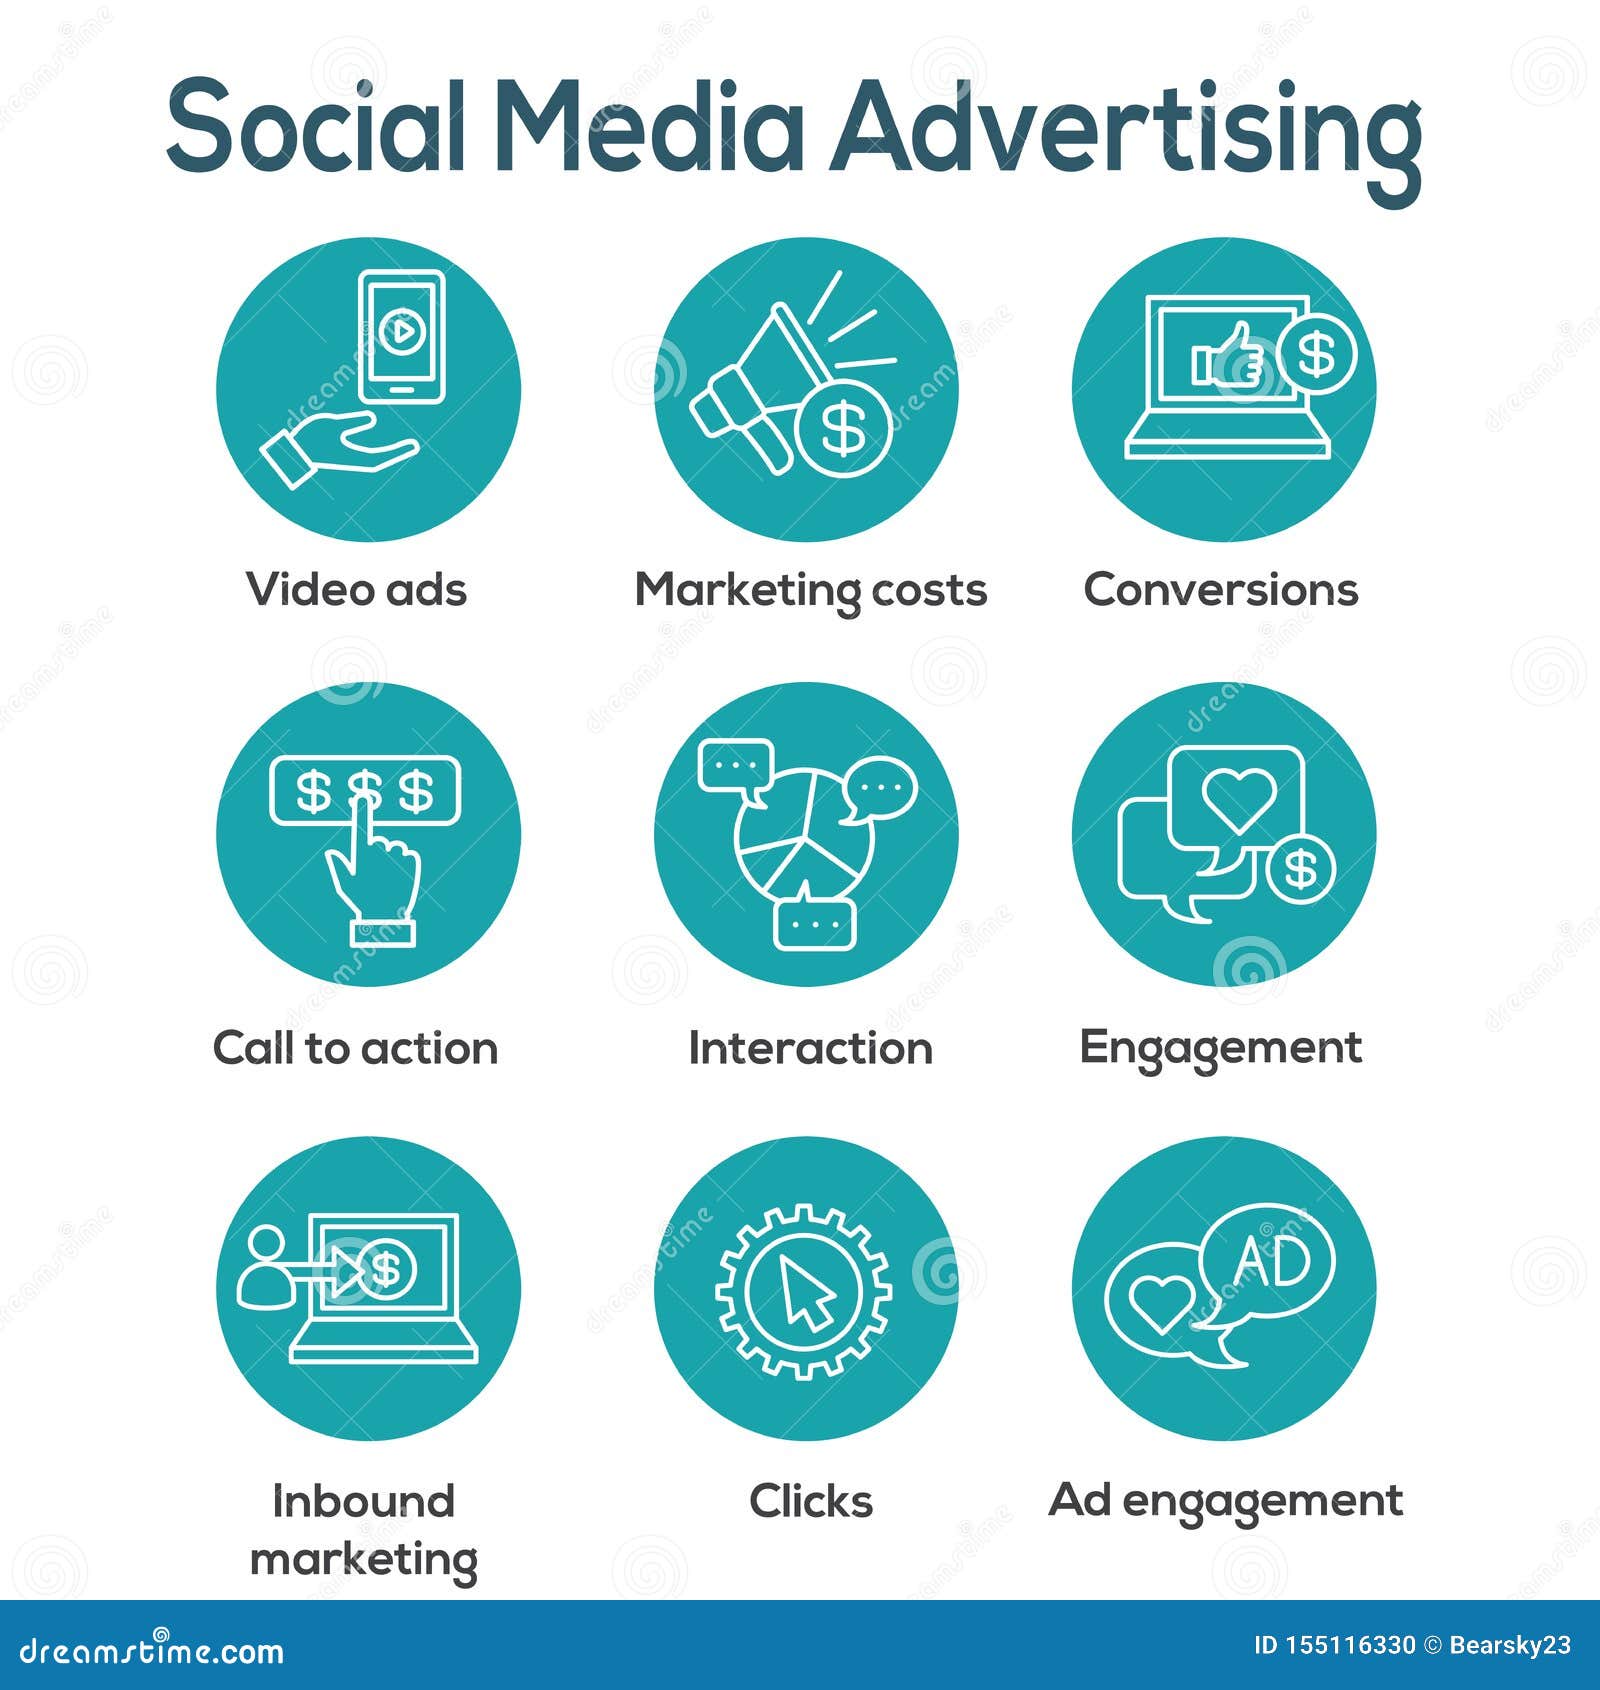 social media ads icon set with video ads, user engagement, etc